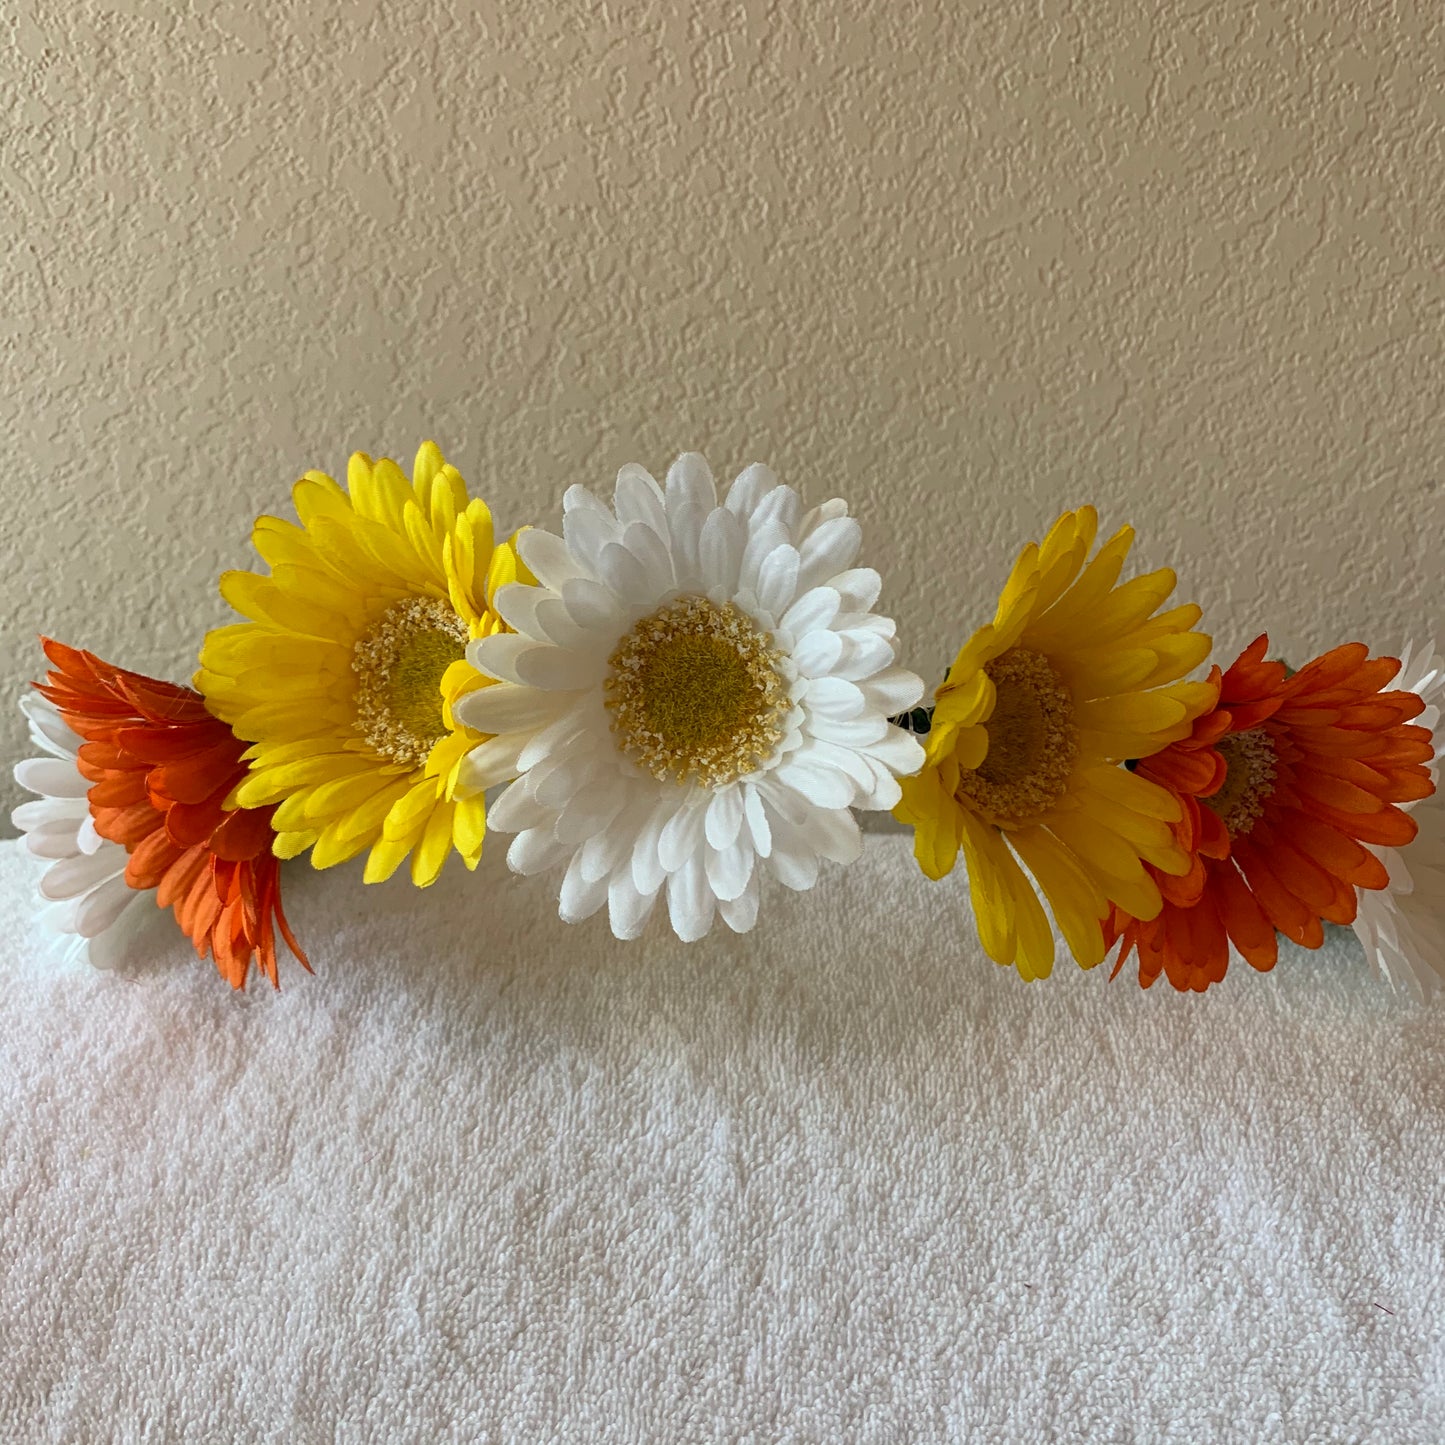 Large Wreath Lighted - Orange, Yellow, and White Daisies